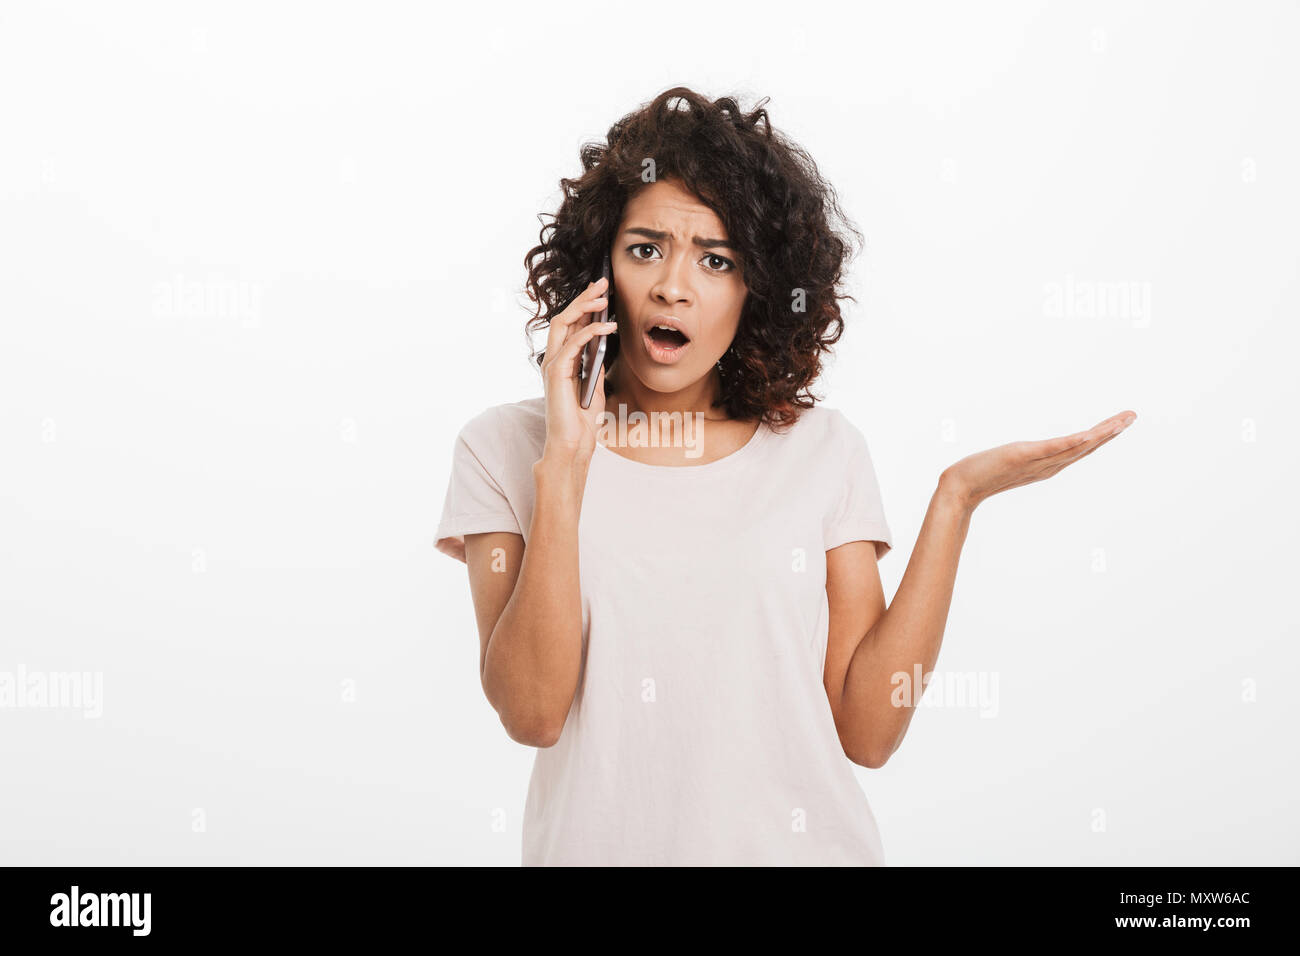 Portrait of serious puzzled woman with afro hairstyle wearing t-shirt having unpleasant conversation on cell phone isolated over white background Stock Photo